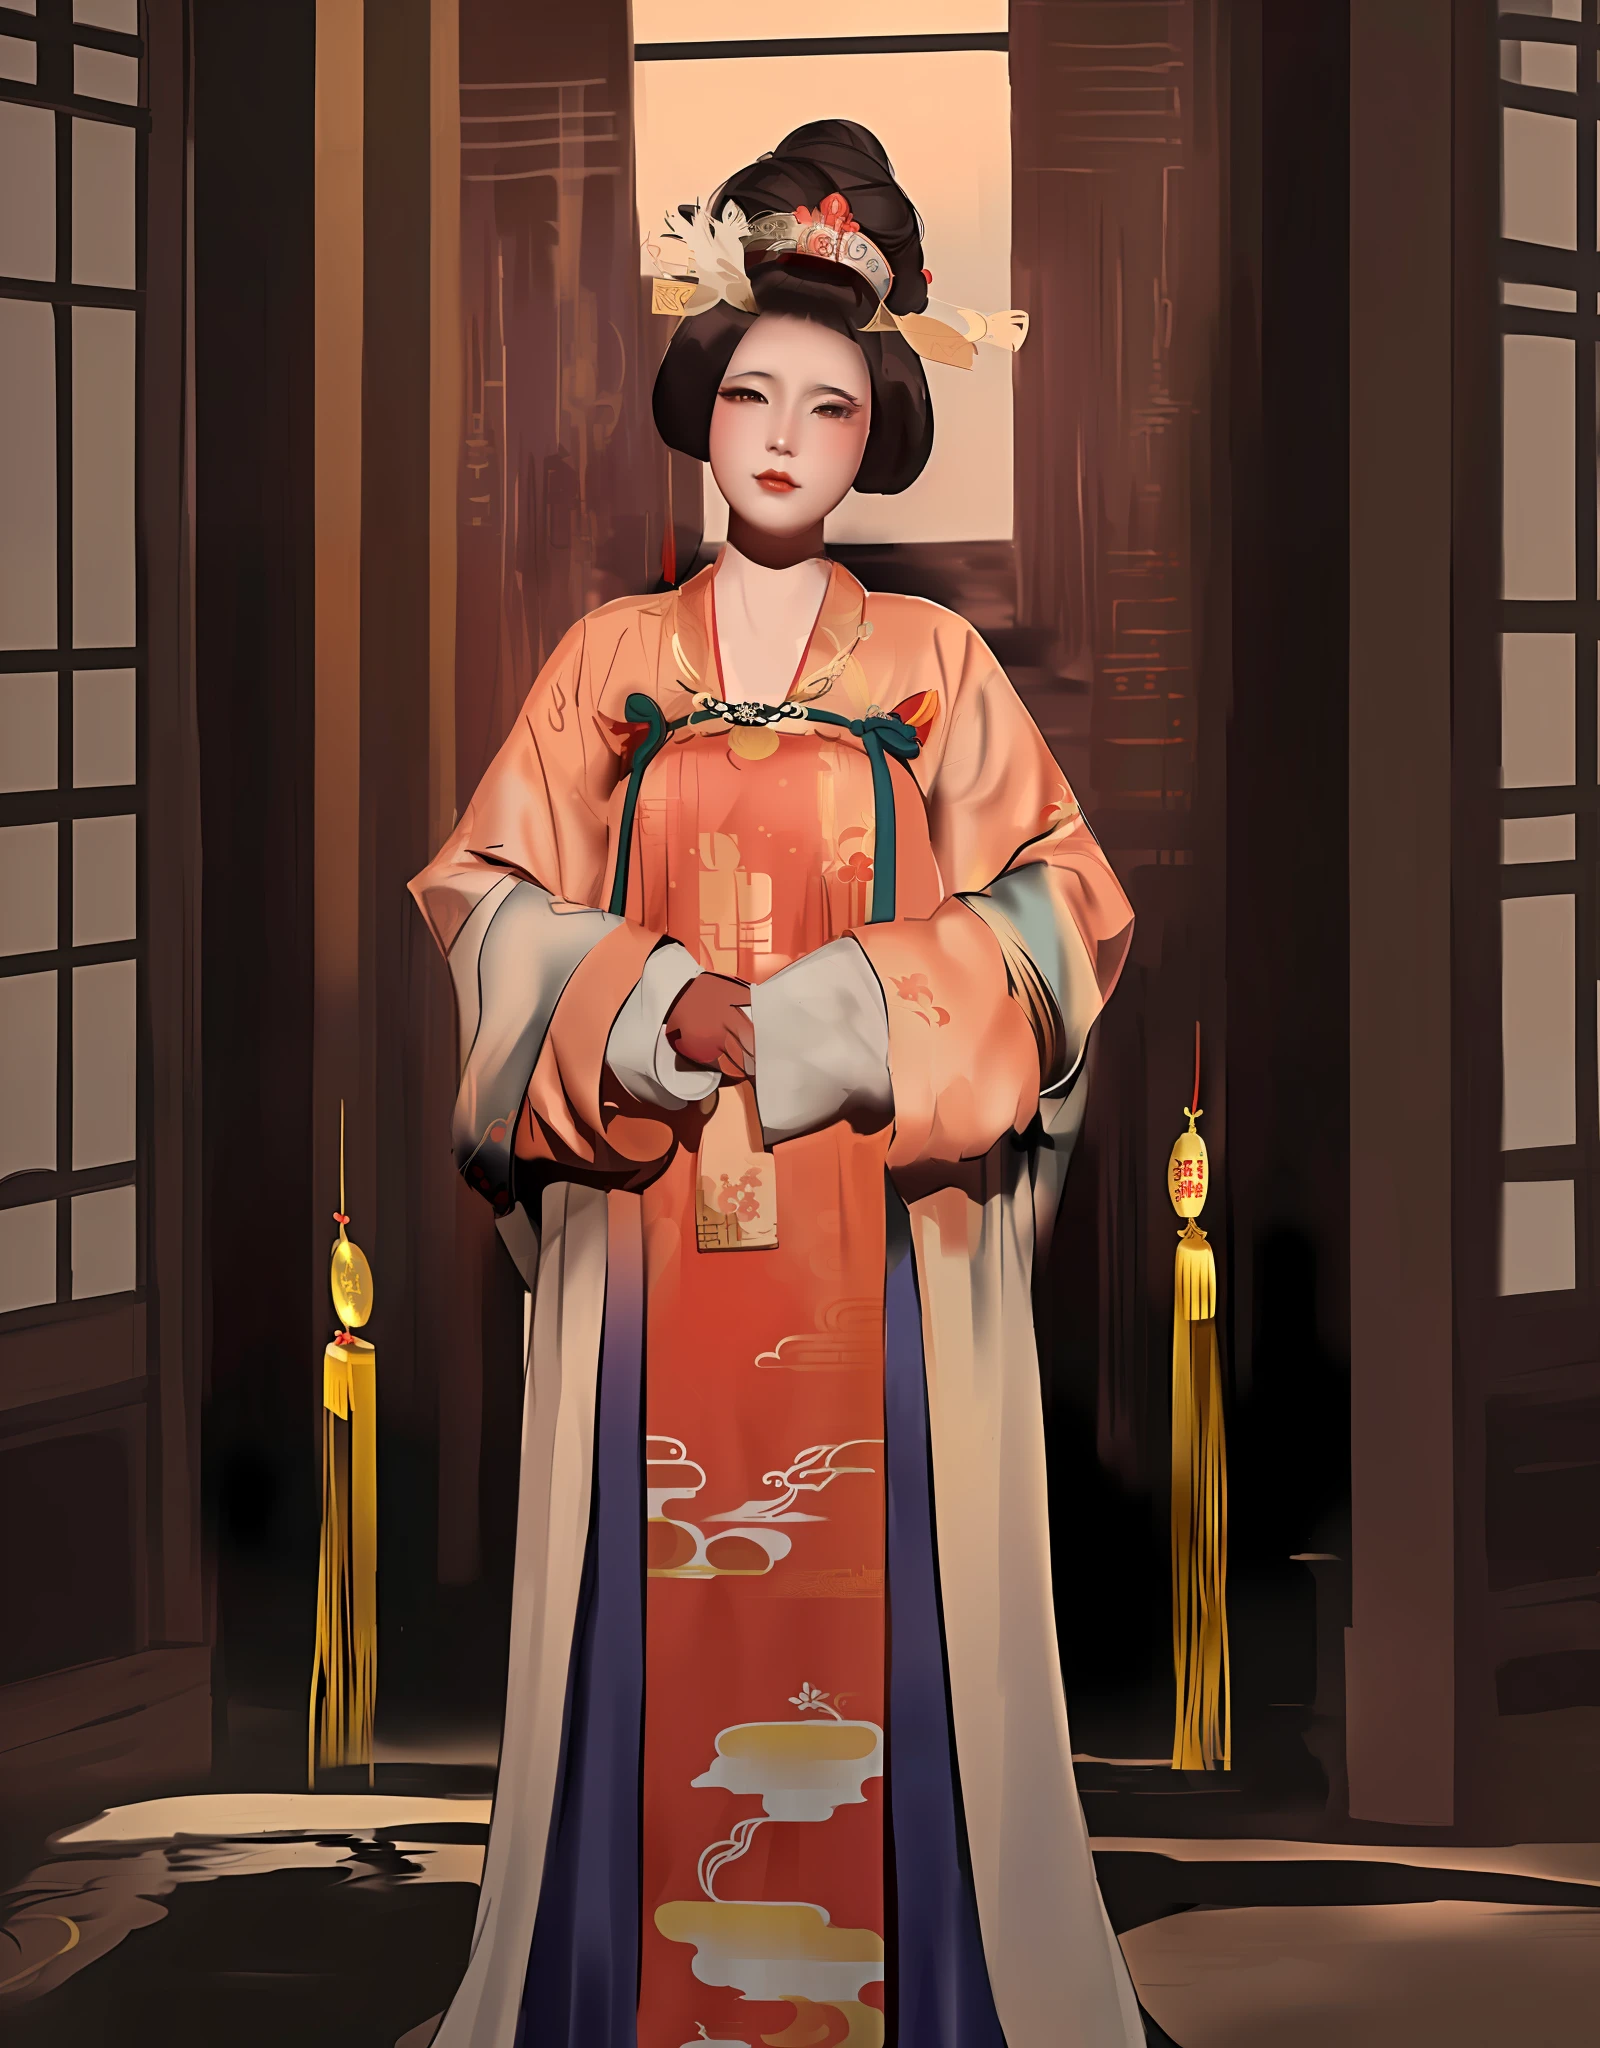 arafed woman in a kimono dress and hat posing for a picture, Inspired by Uemura Shōen, palace ， a girl in hanfu, artwork in the style of guweiz, chinese empress, inspired by Wang Meng, inspired by Min Zhen, inspired by Yun Du-seo, inspired by Yun Shouping, inspired by Lan Ying